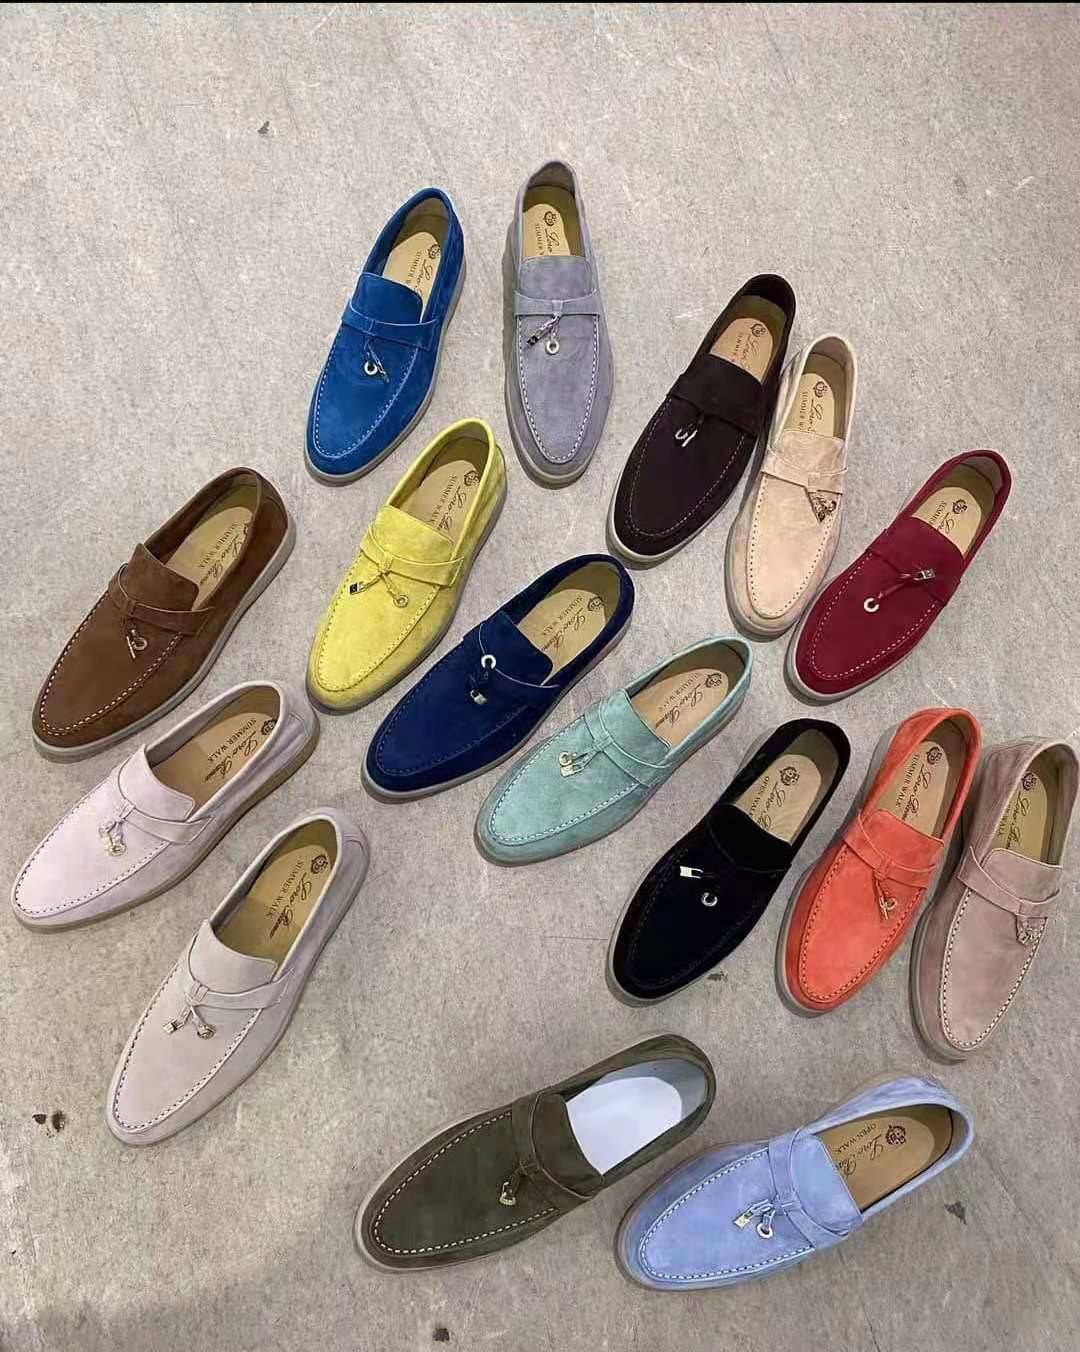 

Sales Fashion Women loafers shoes lady lazy business casual flat Walk slip-on trend Suede leahter stlye comfortable LP for driver shoe Lovers Designer loro Big Size 43, Color 4